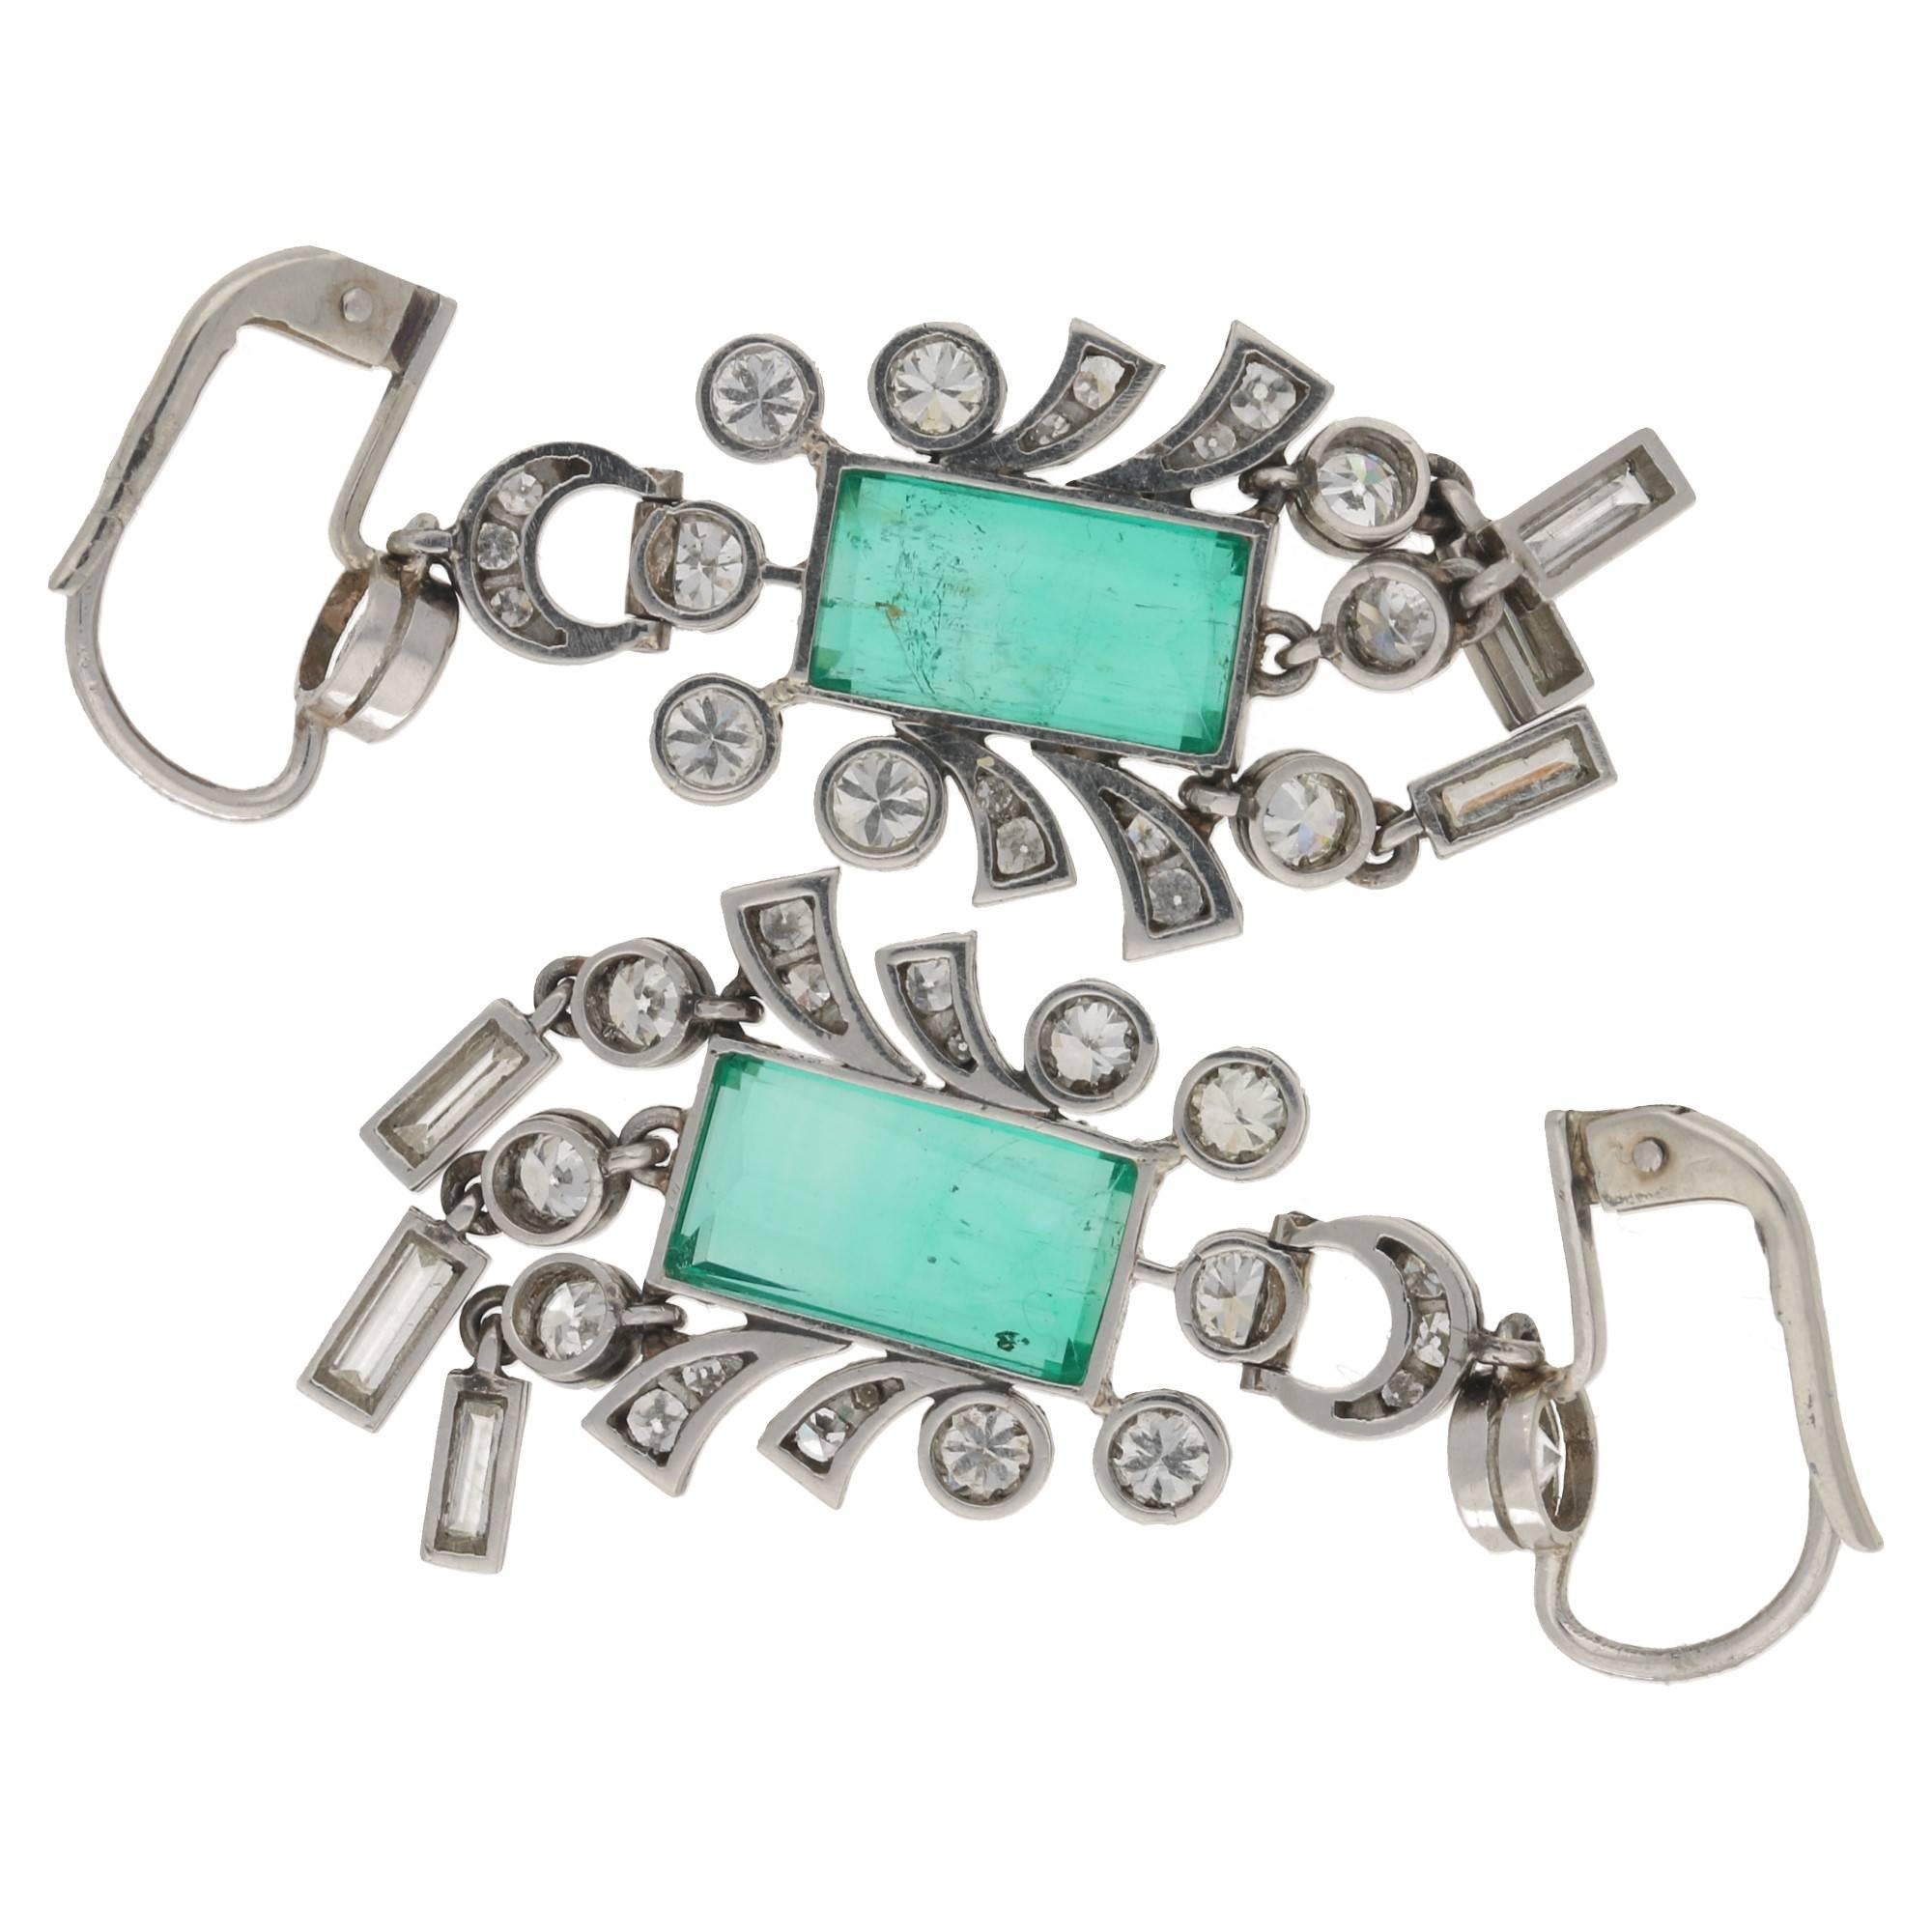 A beautiful pair of 1930's emerald and diamond earrings, The emerald cut emeralds are rub over set to the centre and framed by mixture of cuts, European cuts and baguette cuts. The earrings are affixed to period clips and are set fully in